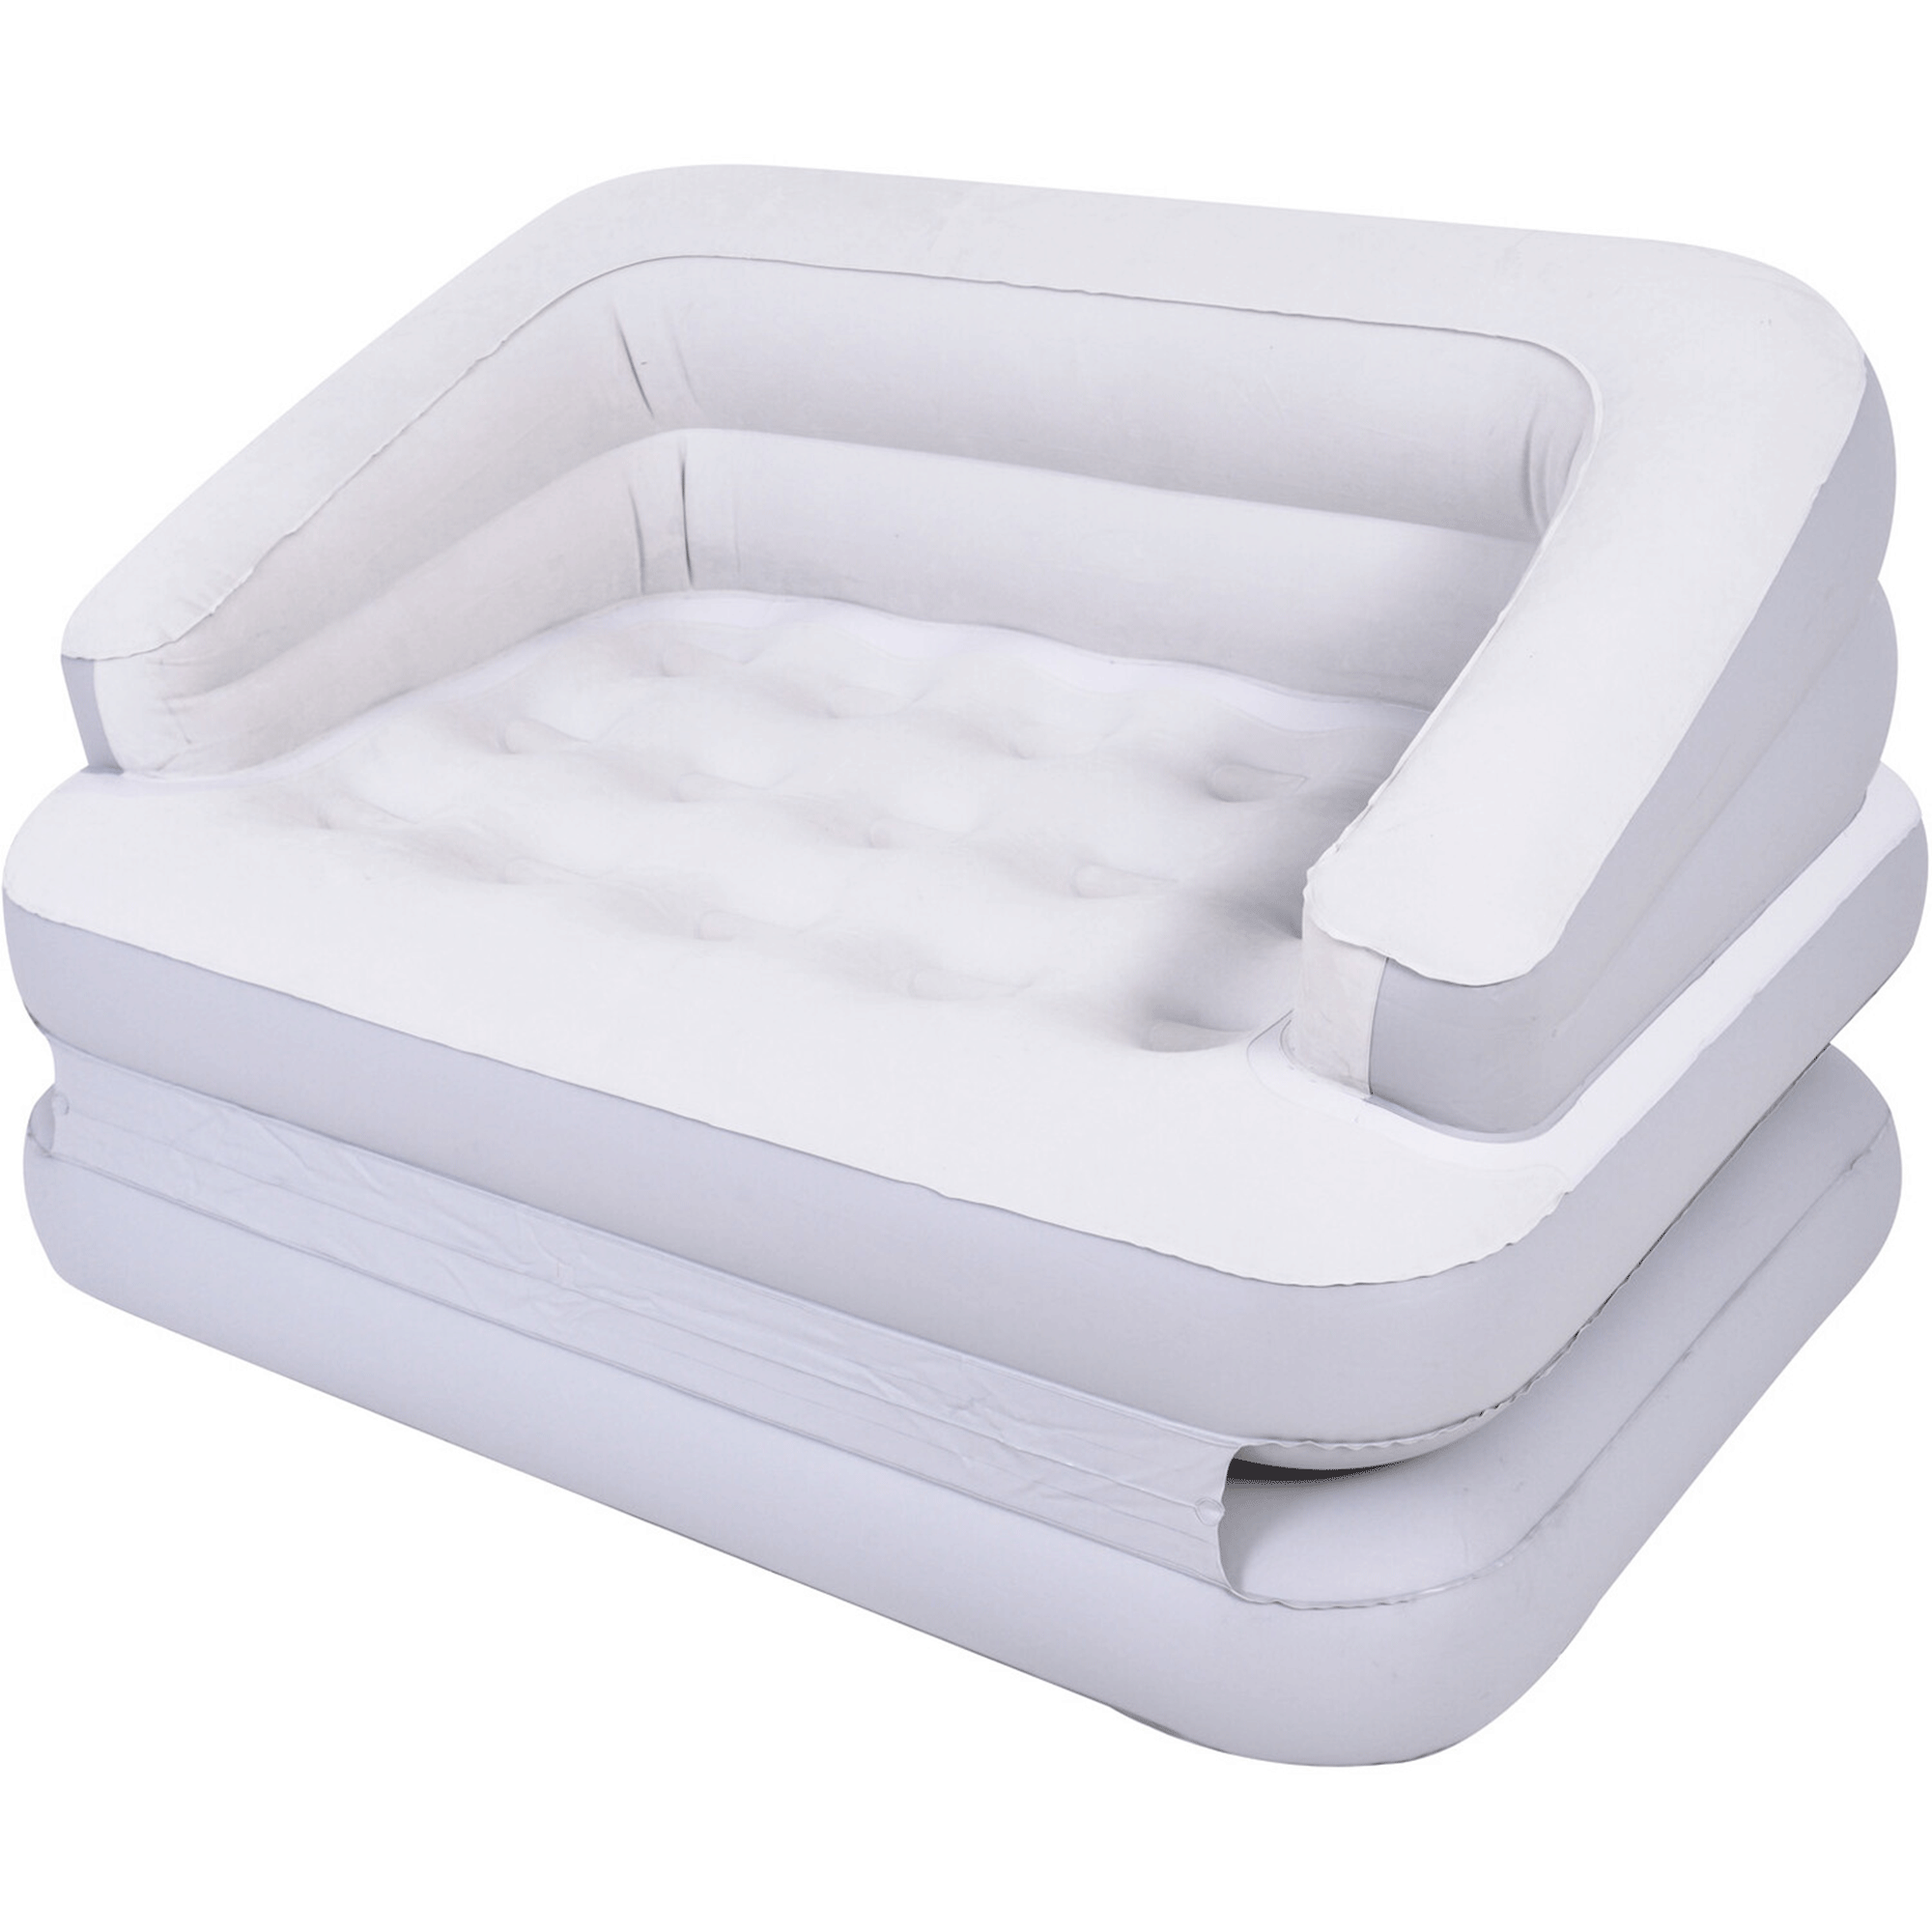 Purple inflatable sofa bed